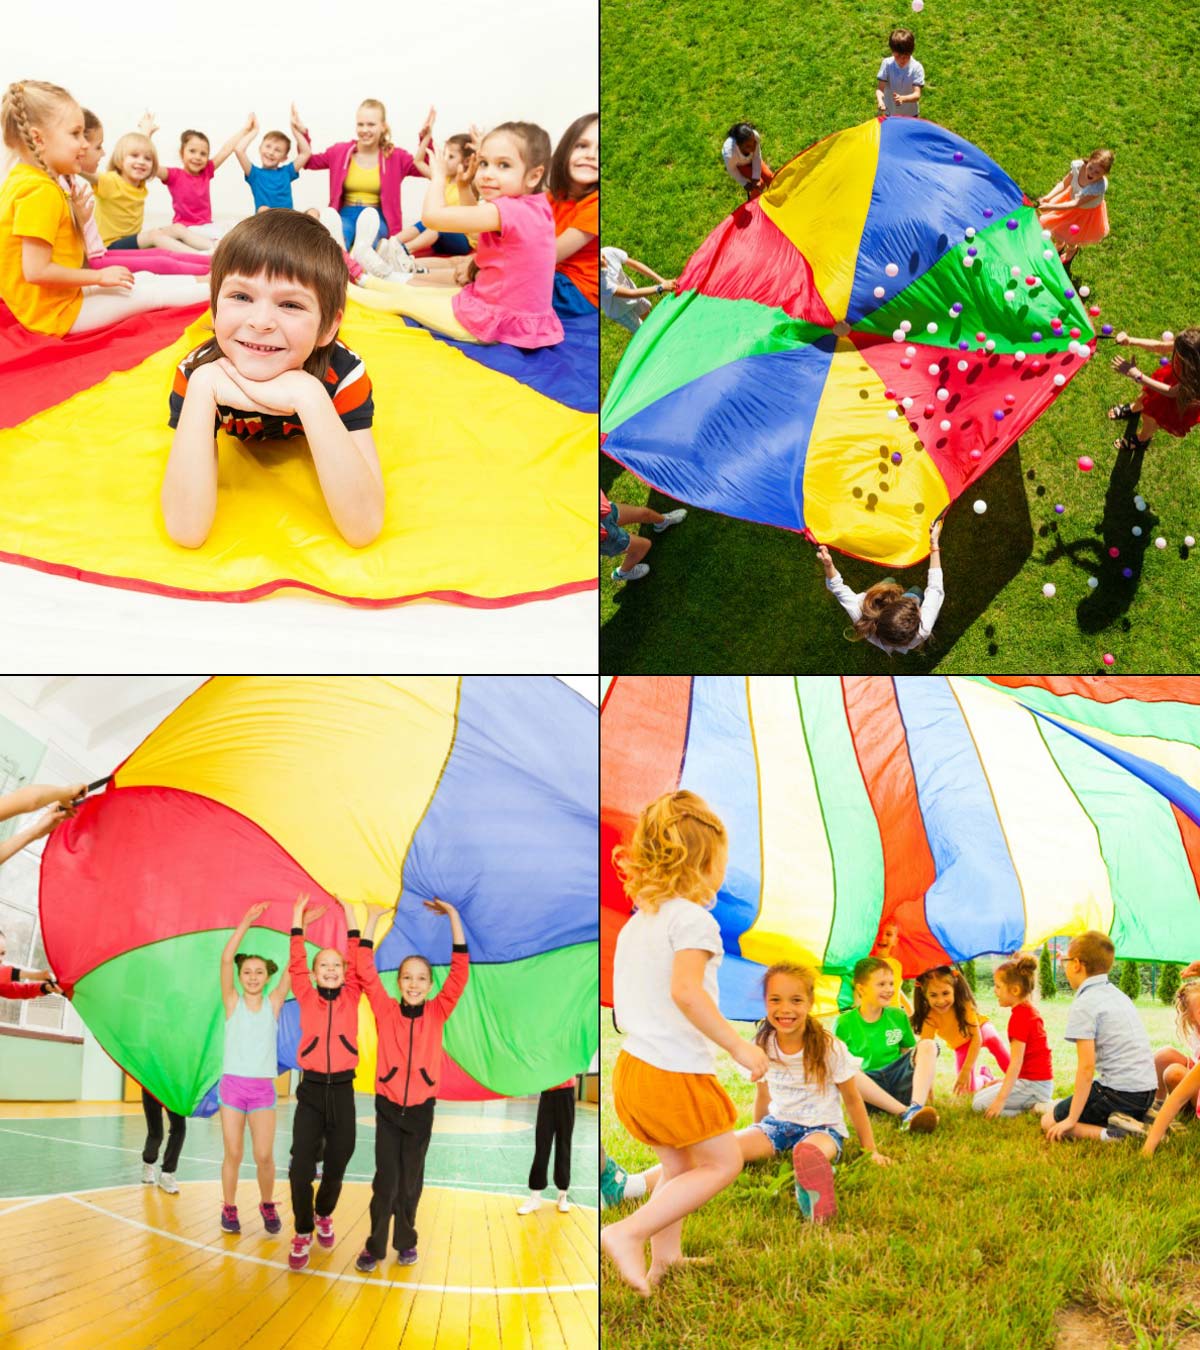 WINOMO Kids Play Parachute Rainbow Kindergarten Early Education Toy for Party Sports Activities Group Exercise Outdoor 